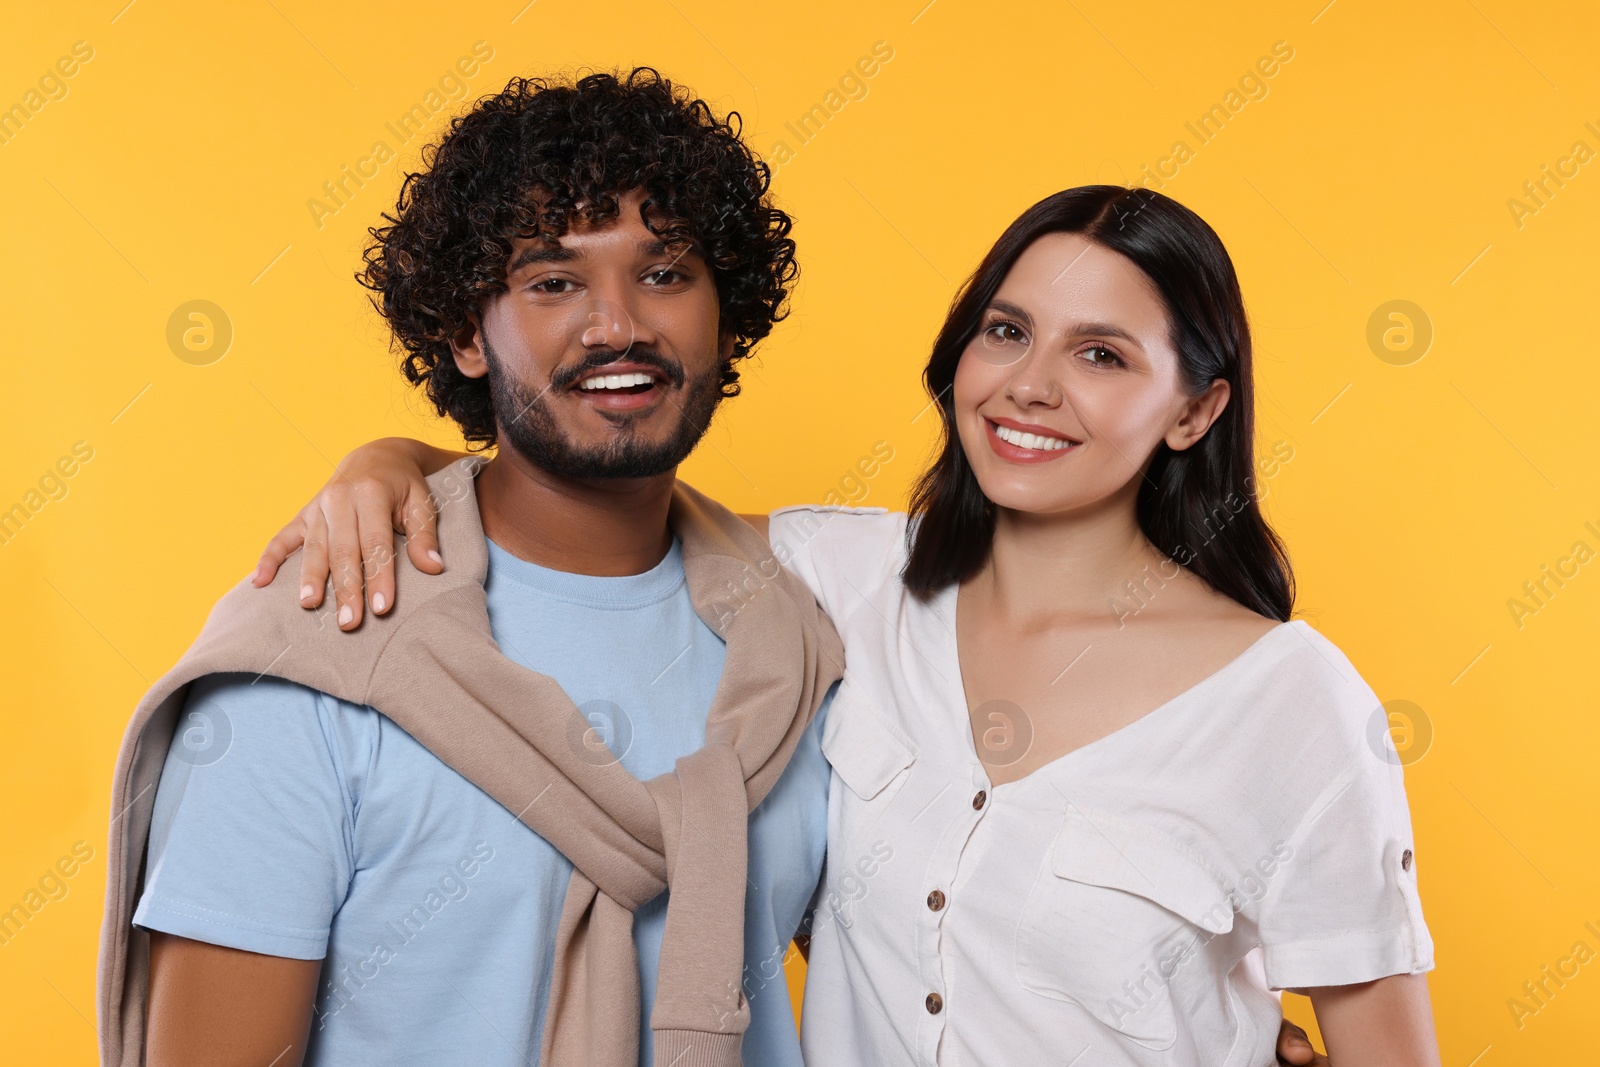 Photo of International dating. Portrait of happy couple on yellow background